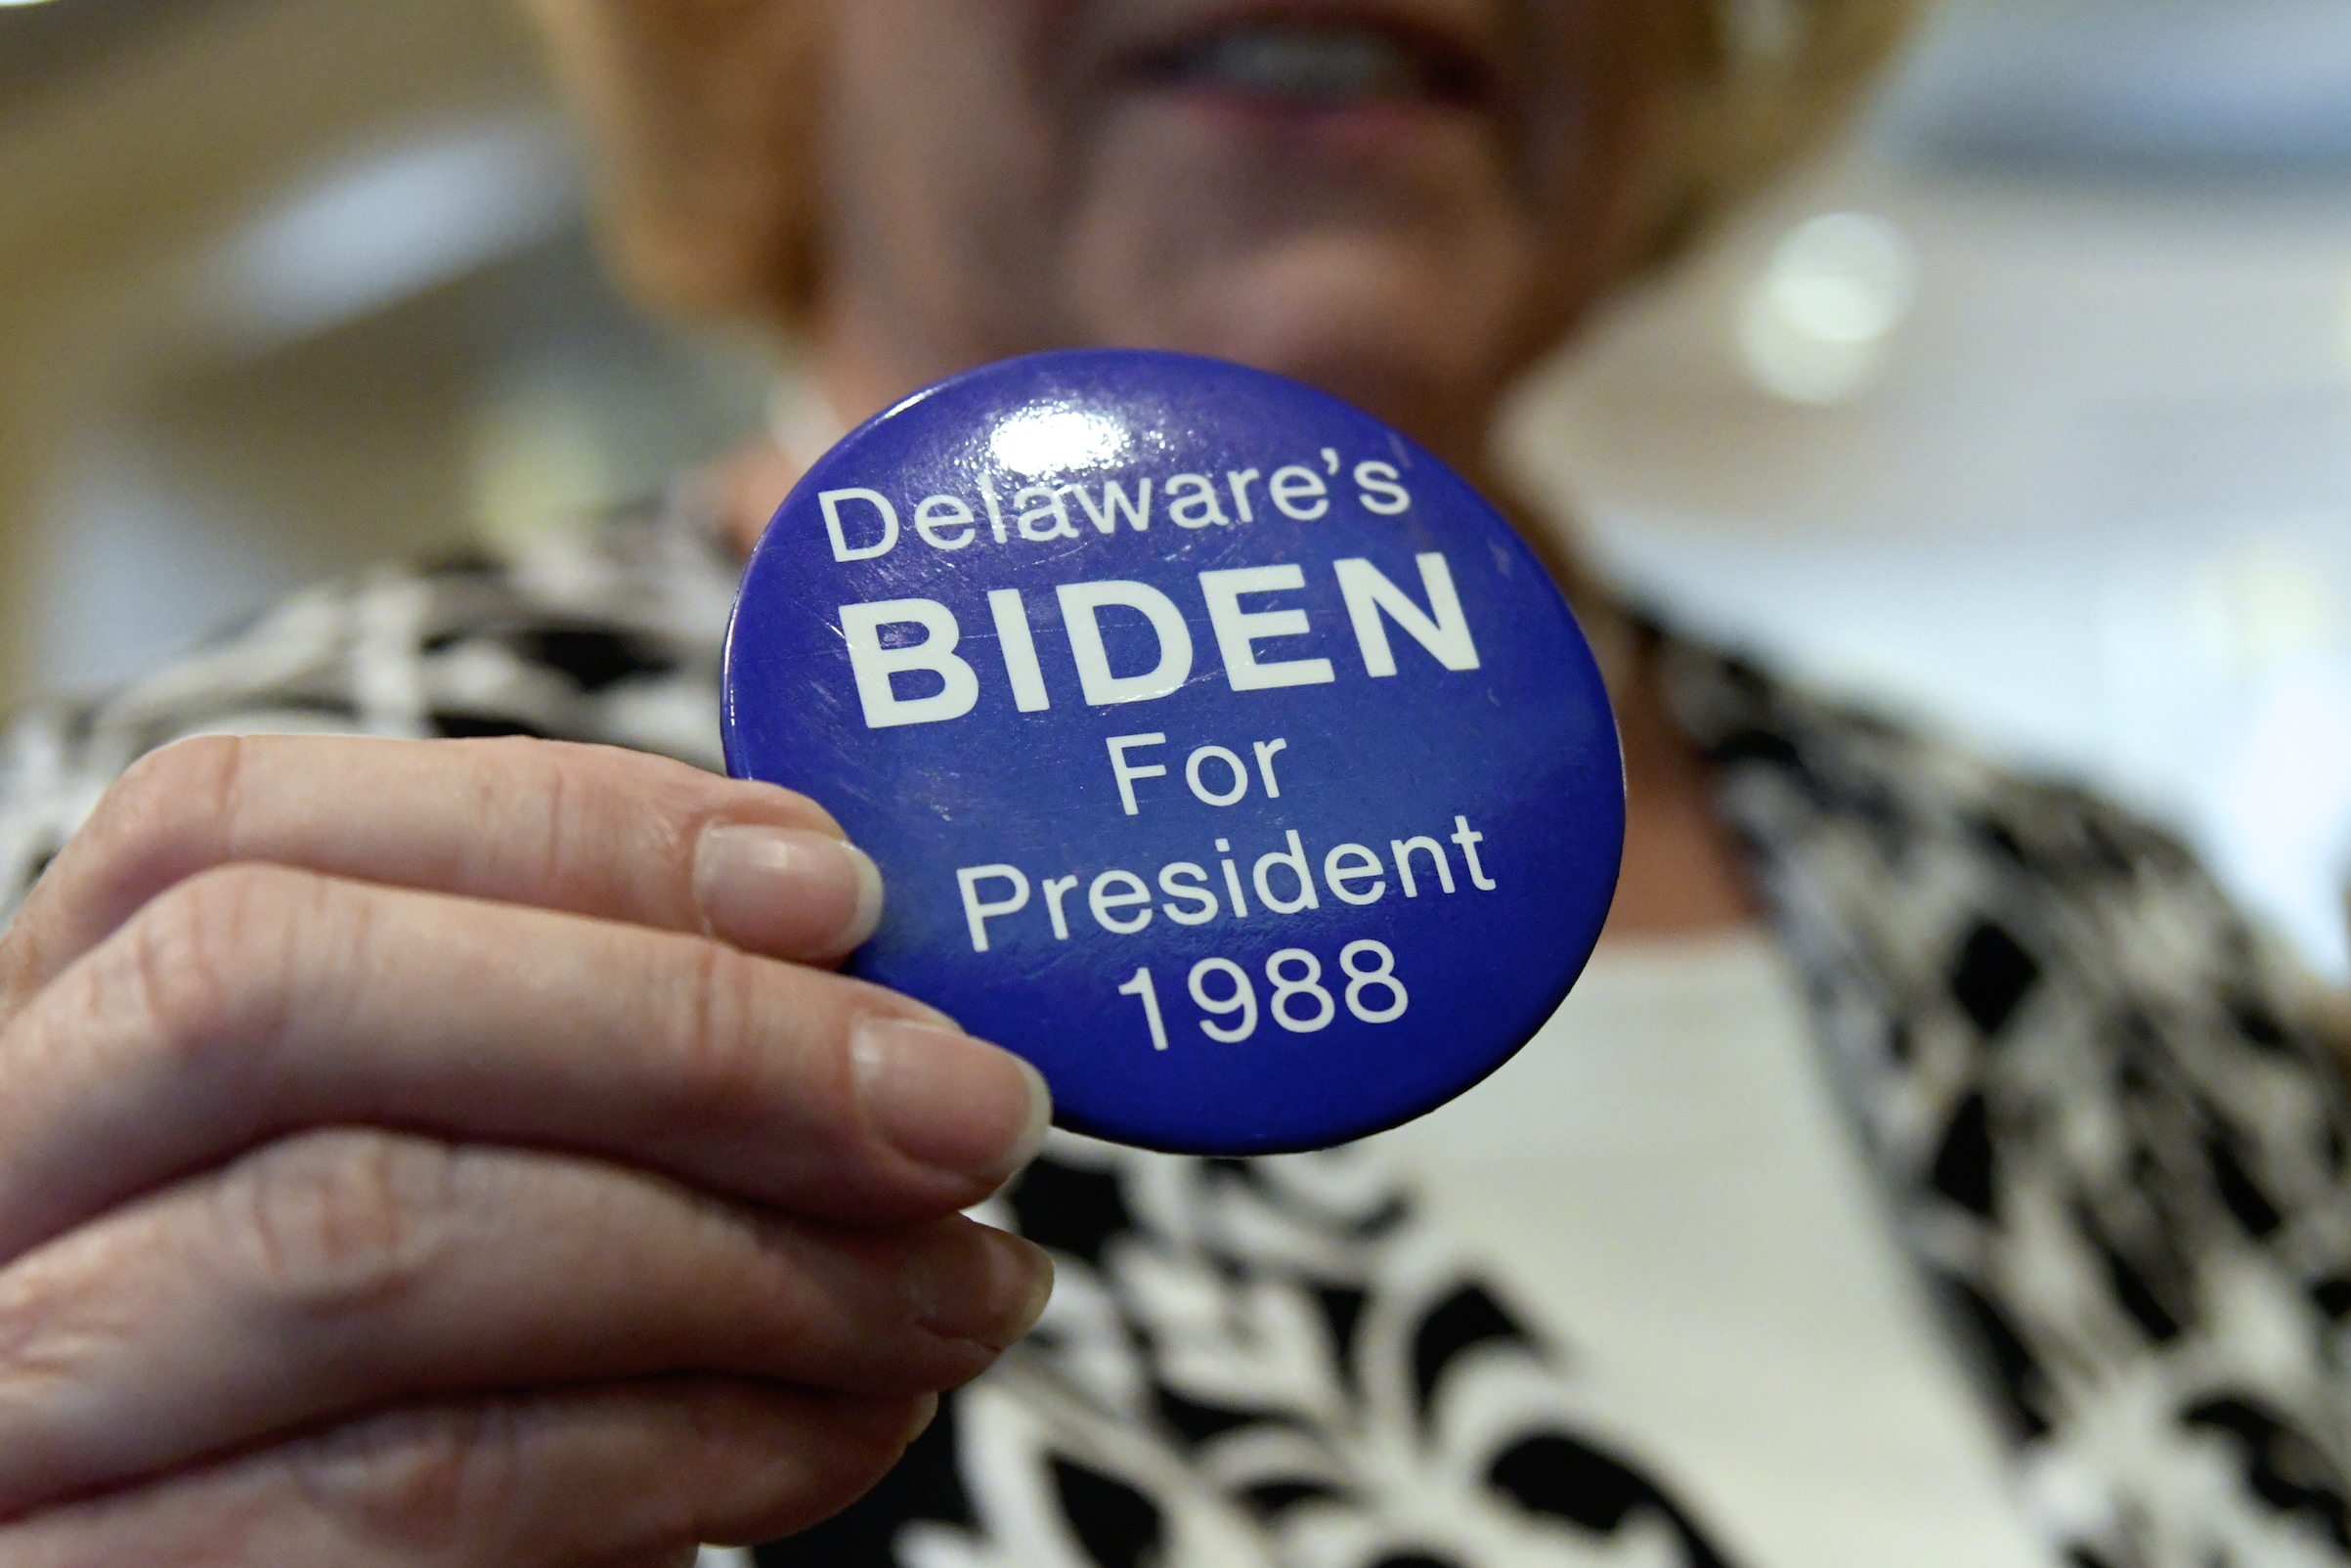 A supporter holds up a Biden for President button from 1988 in Dover, Del., on March 16, 2019. (Bastiaan Slabbers—NurPhoto via Getty Images)